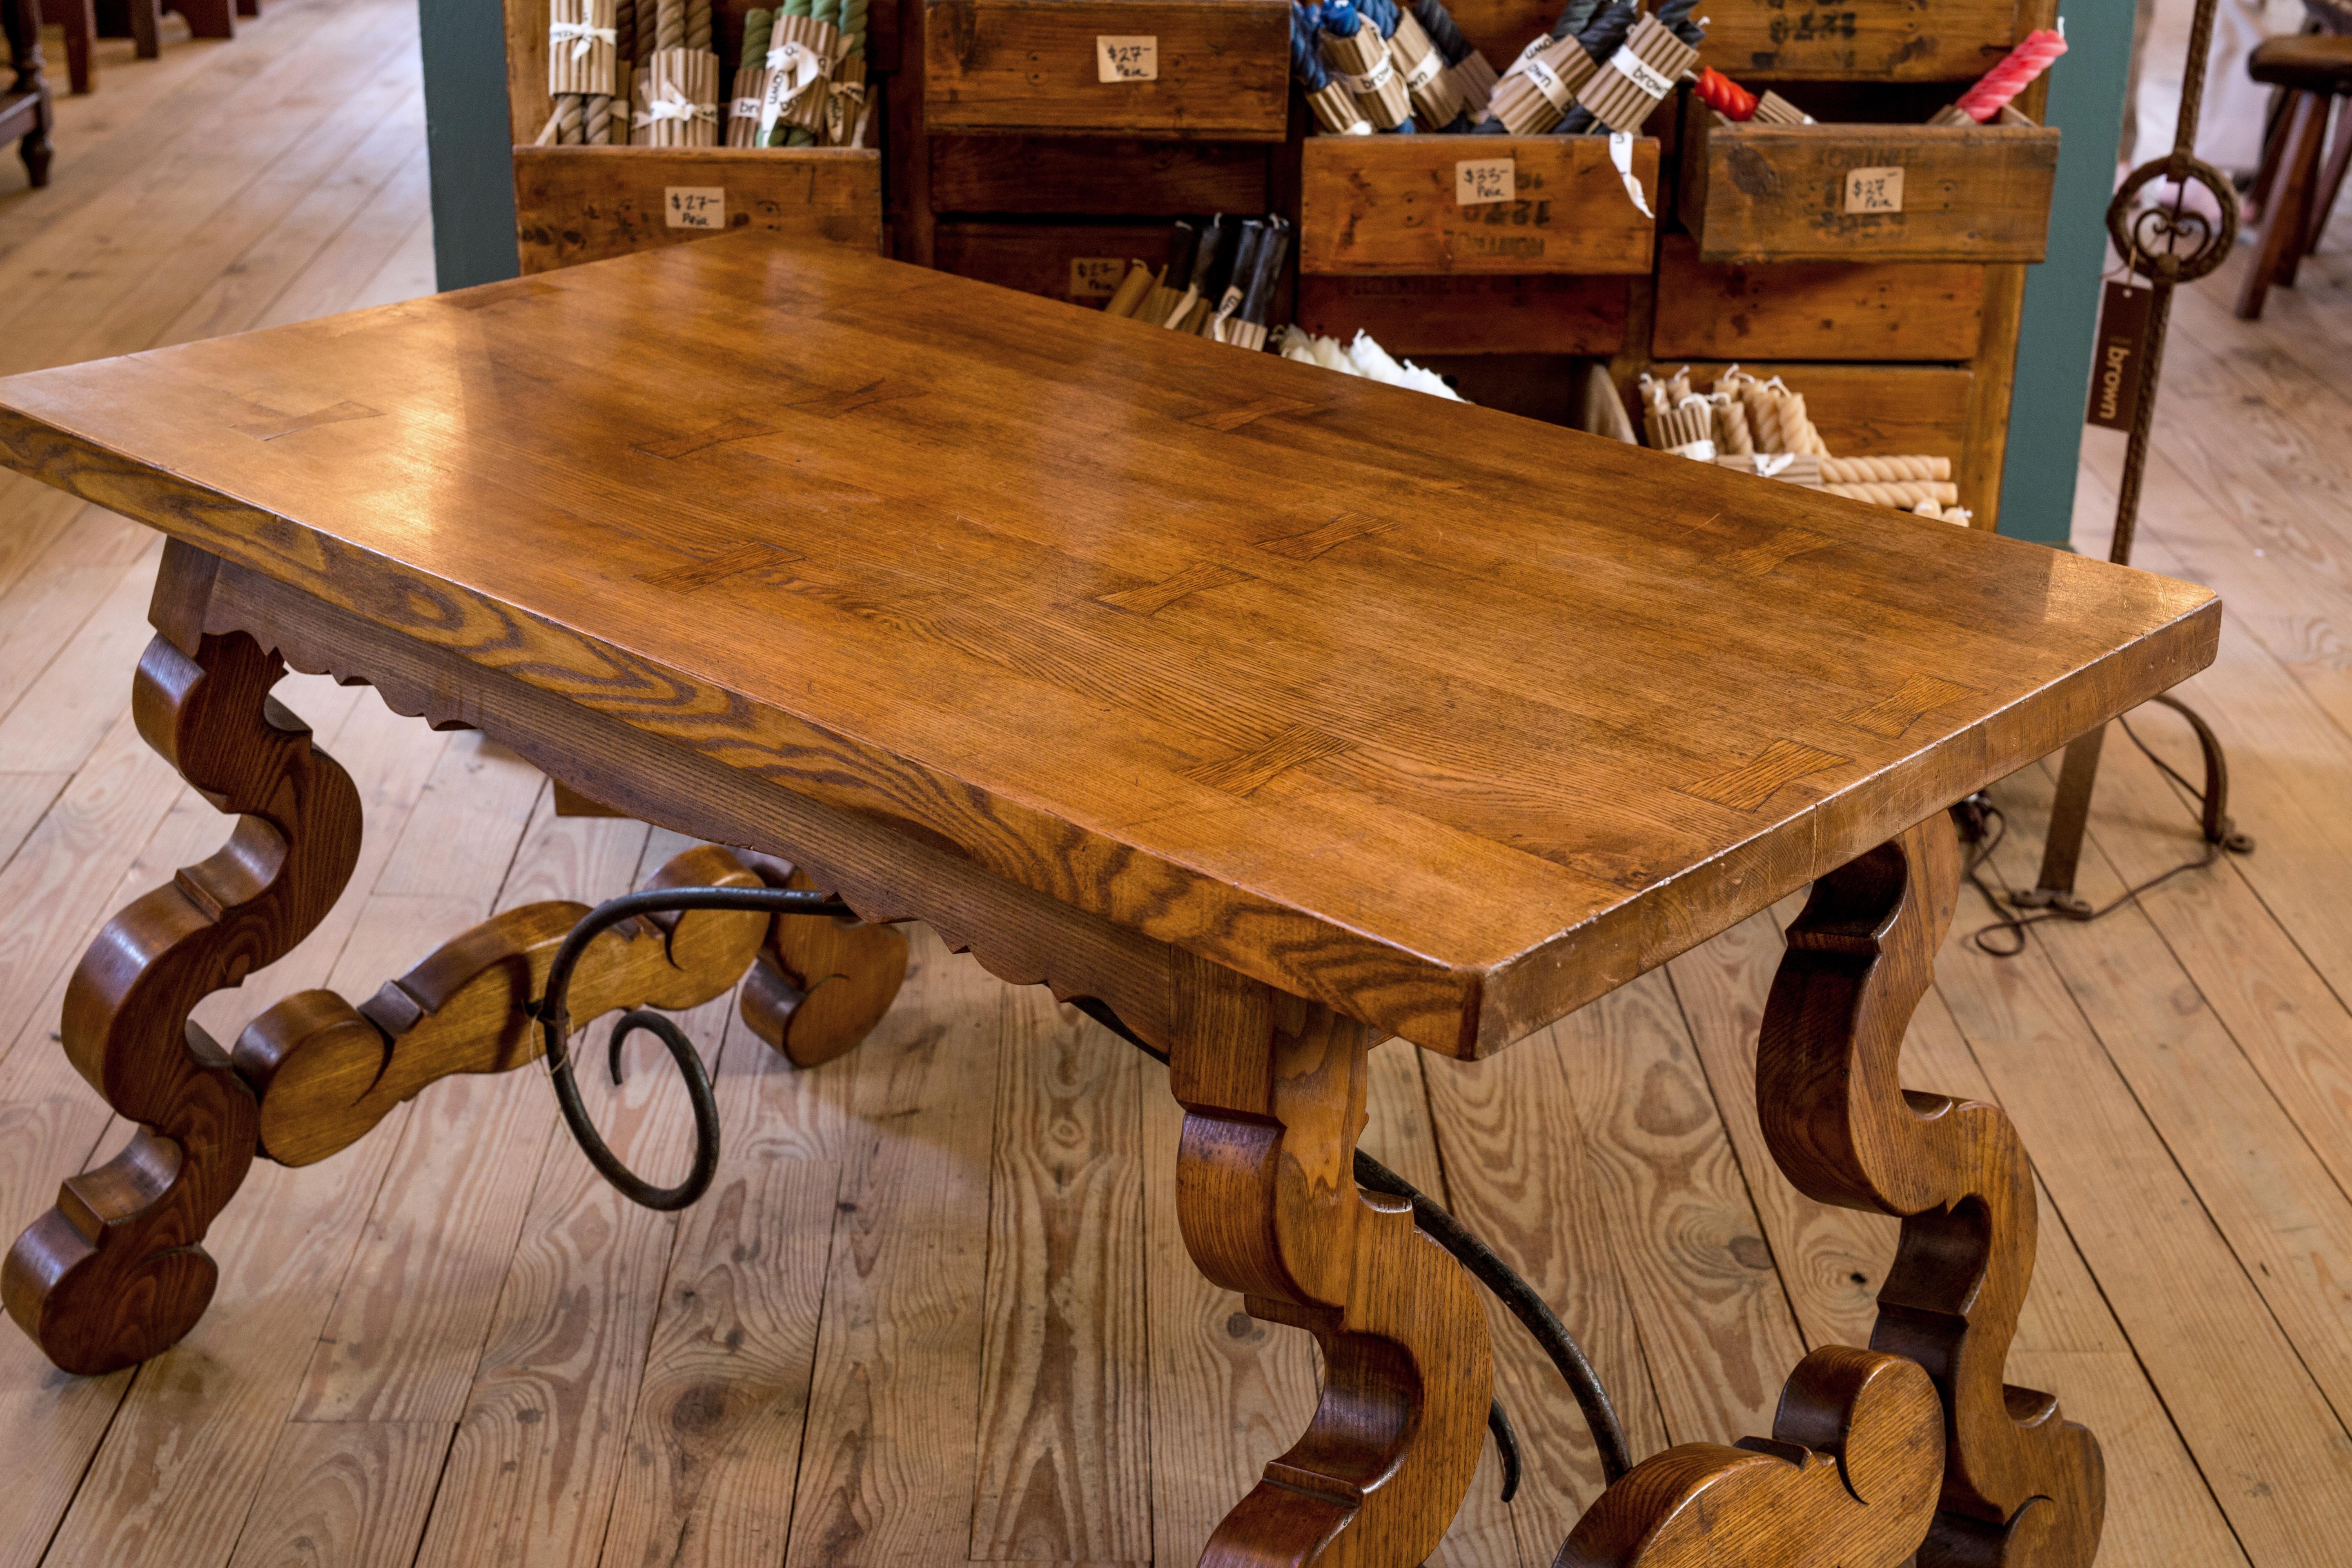 This table is made of massive oak and forged iron stretchers.

It has unusual and interesting dovetails in the top of the table.

It make a nice small dining table or a wonderful desk or console.